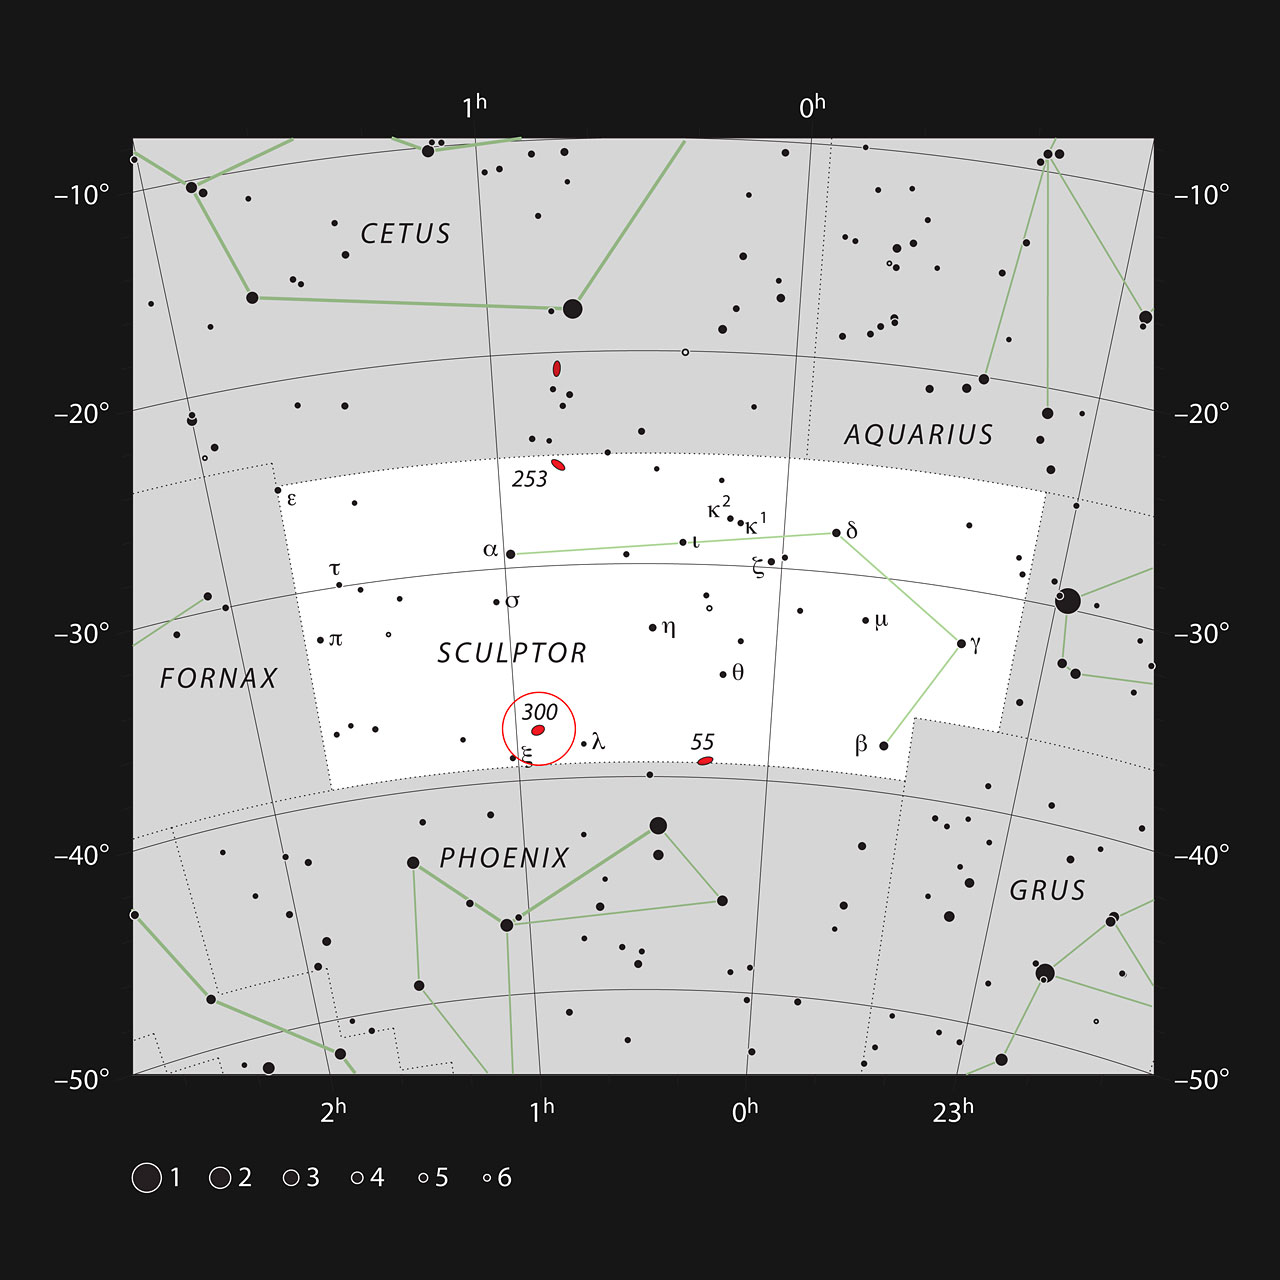 NGC 300 in the constellation of Sculptor